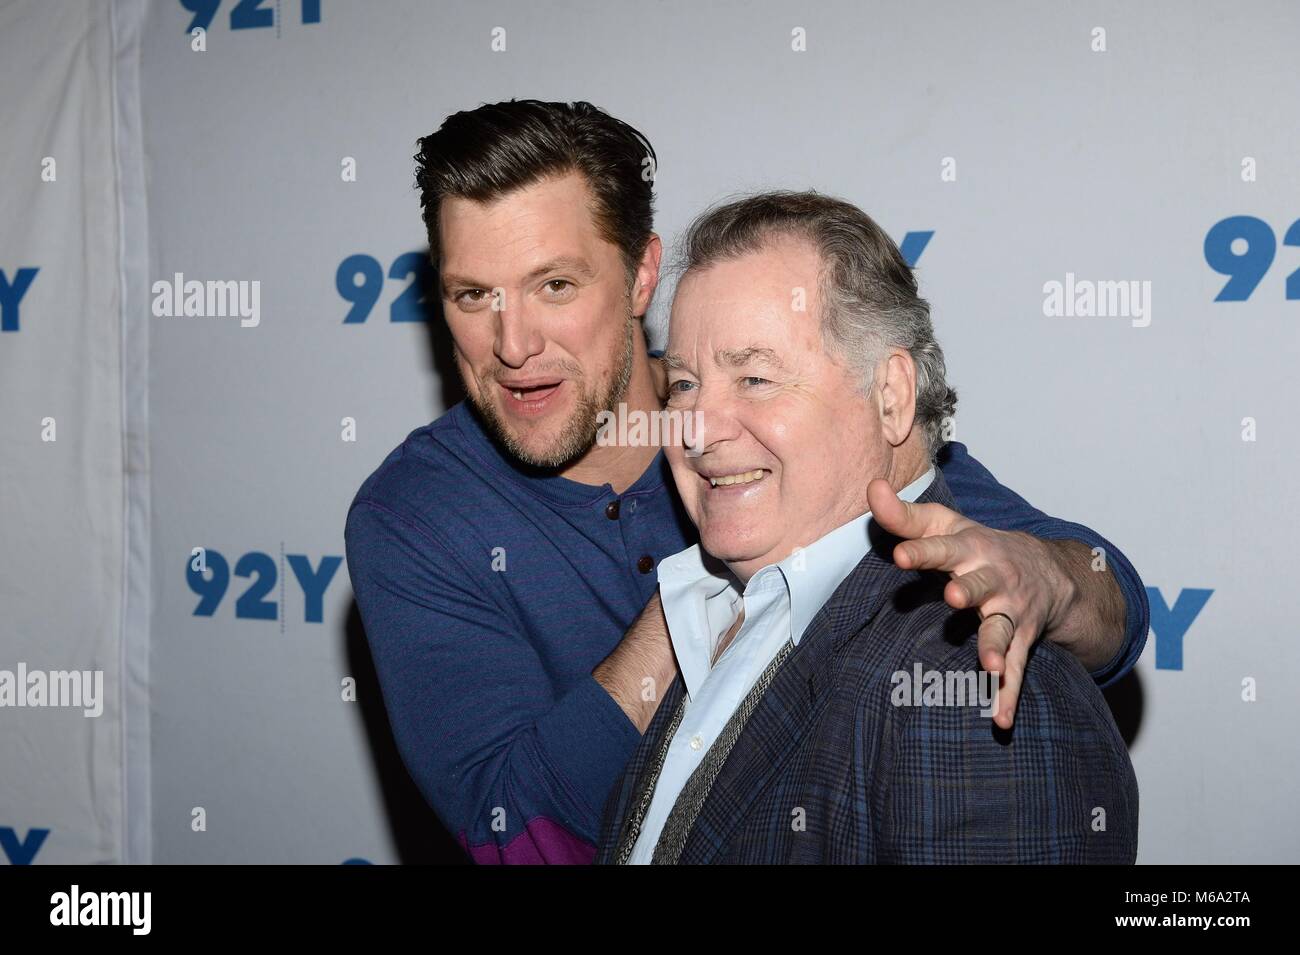 New York, NY, USA. 1st Mar, 2018. Shane McRae (L), Peter Gerety at arrivals for SNEAKY PETE and THE MARVELOUS MRS. MAISEL Casts Appearance, 92nd Street Y, New York, NY March 1, 2018. Credit: Eli Winston/Everett Collection/Alamy Live News Stock Photo